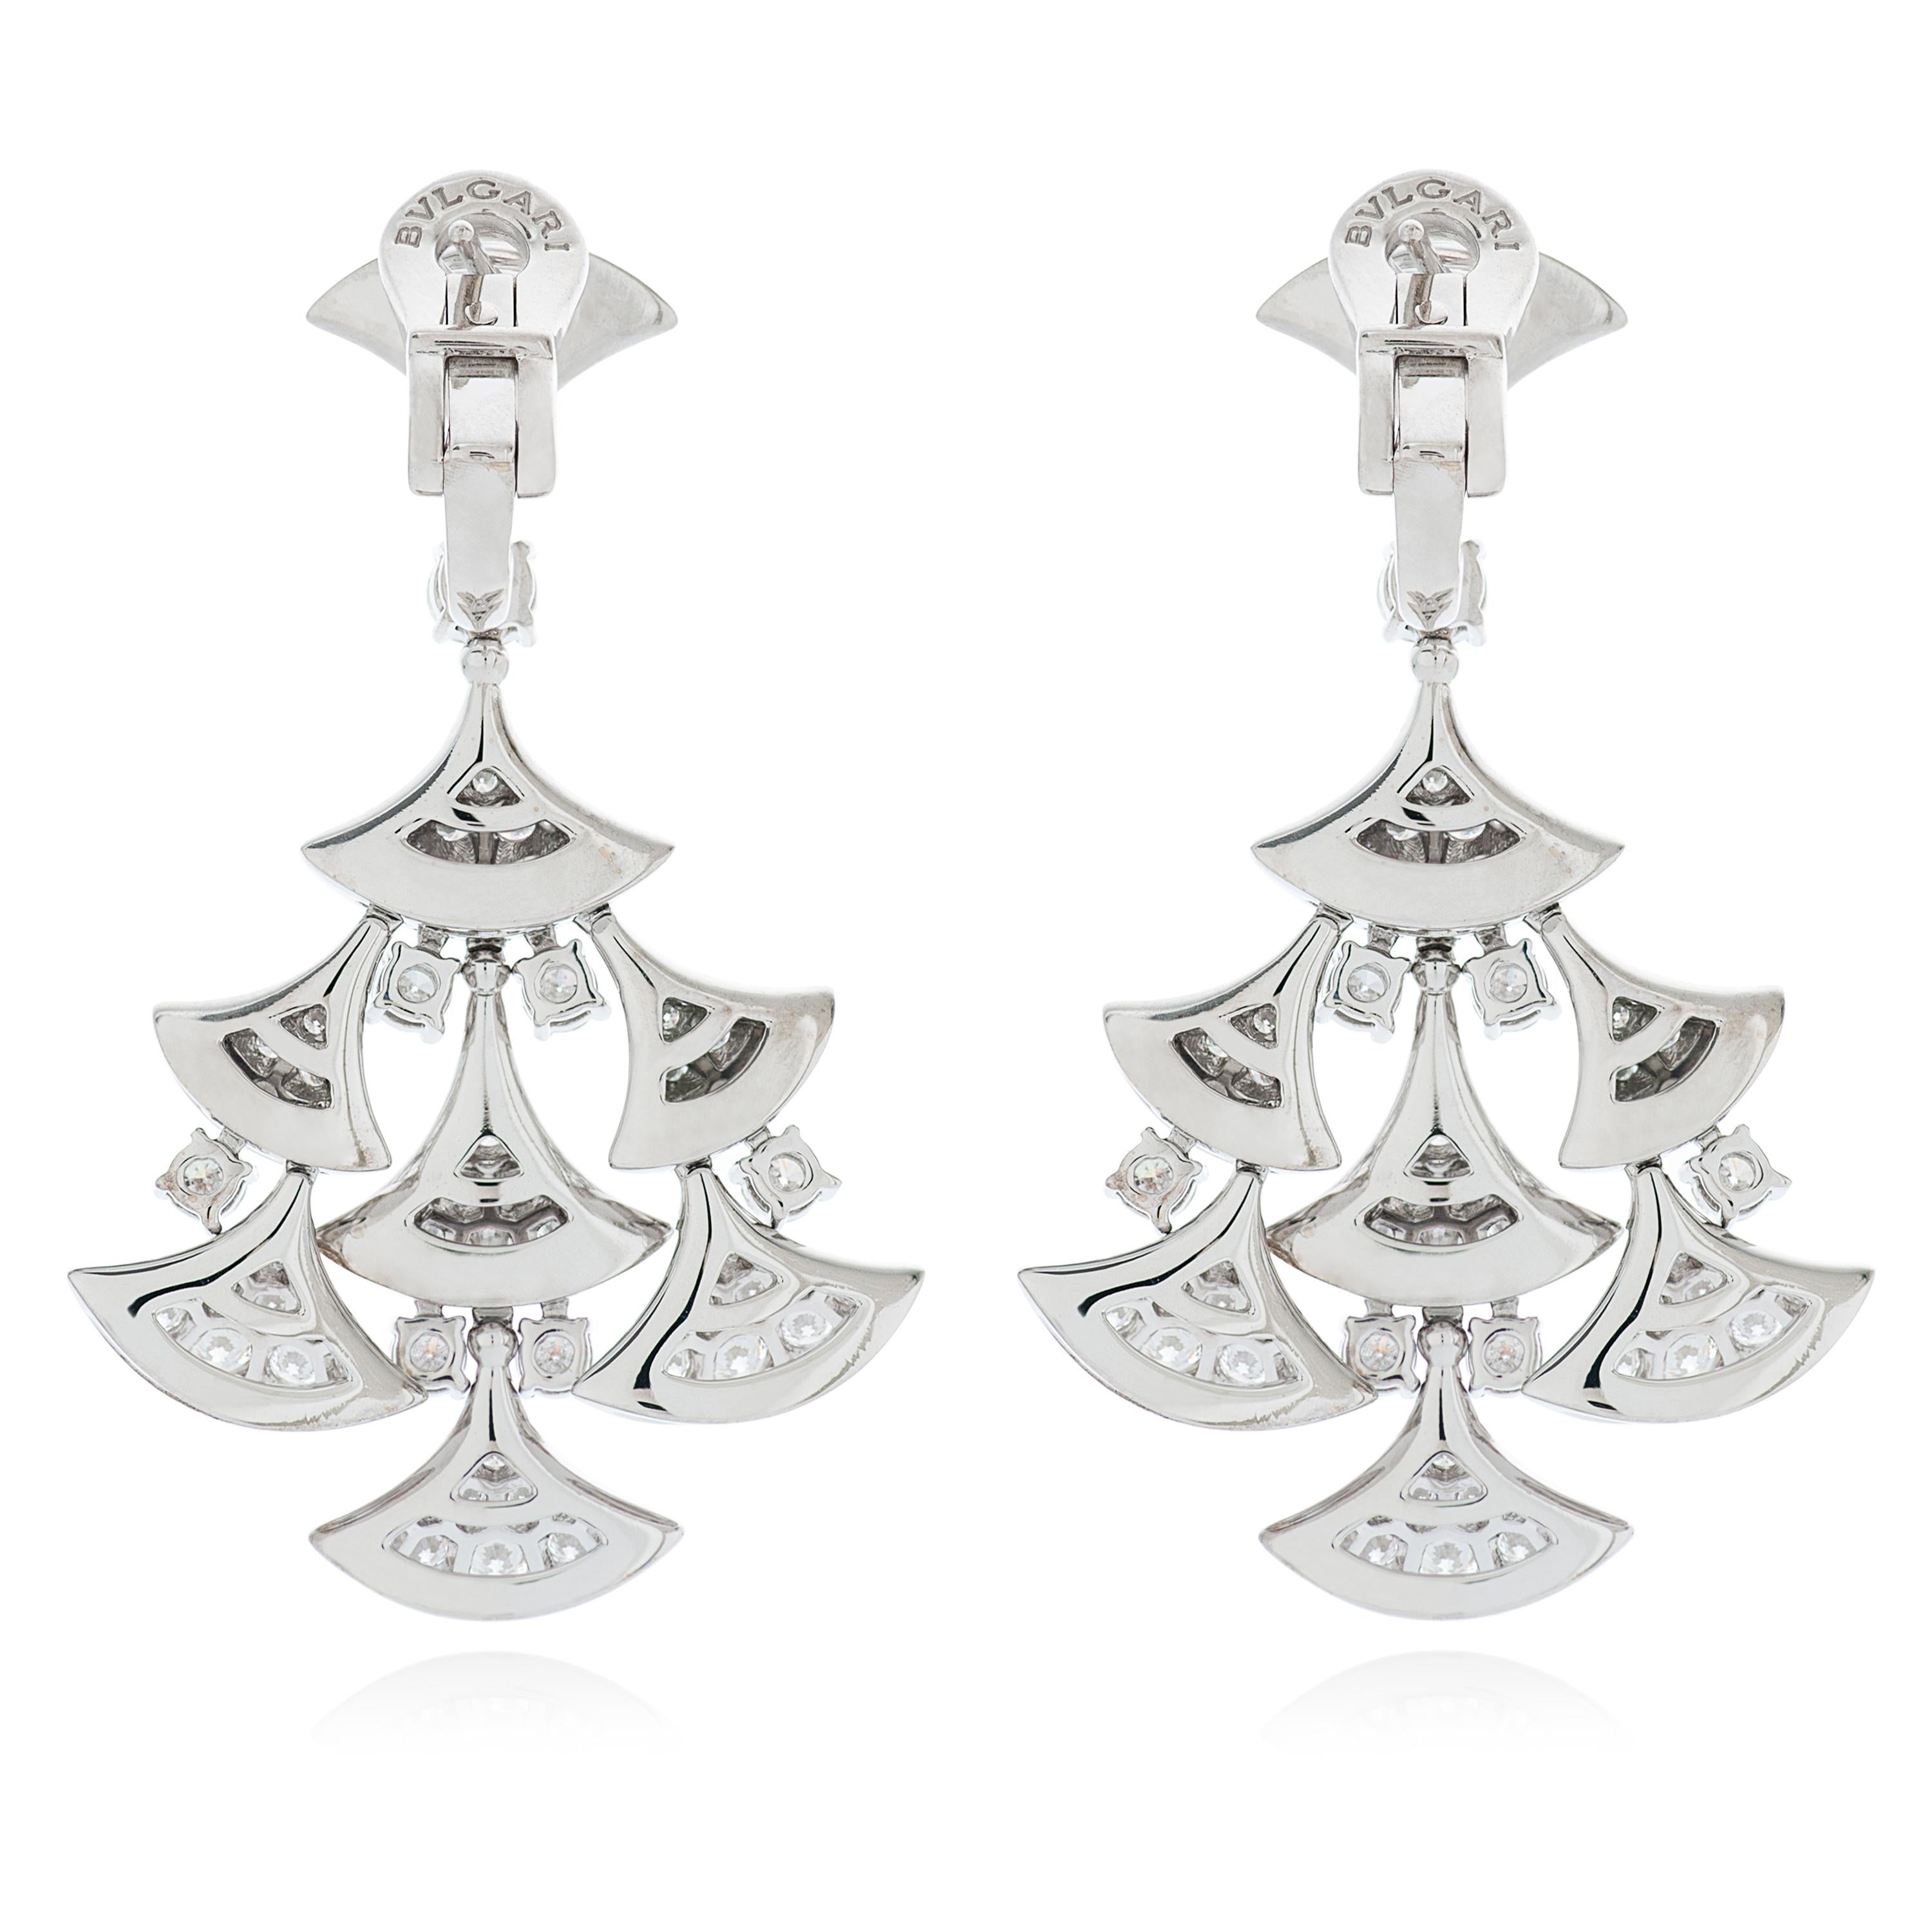 Bulgari Diva's Dream diamond chandelier earrings in 18k white gold.  

This pair of Diva's Dream earrings measure 50mm long by 34mm wide and feature approximately 7.95 carats of round brilliant cut diamonds with F+ color and VS+ clarity.  

Numbered